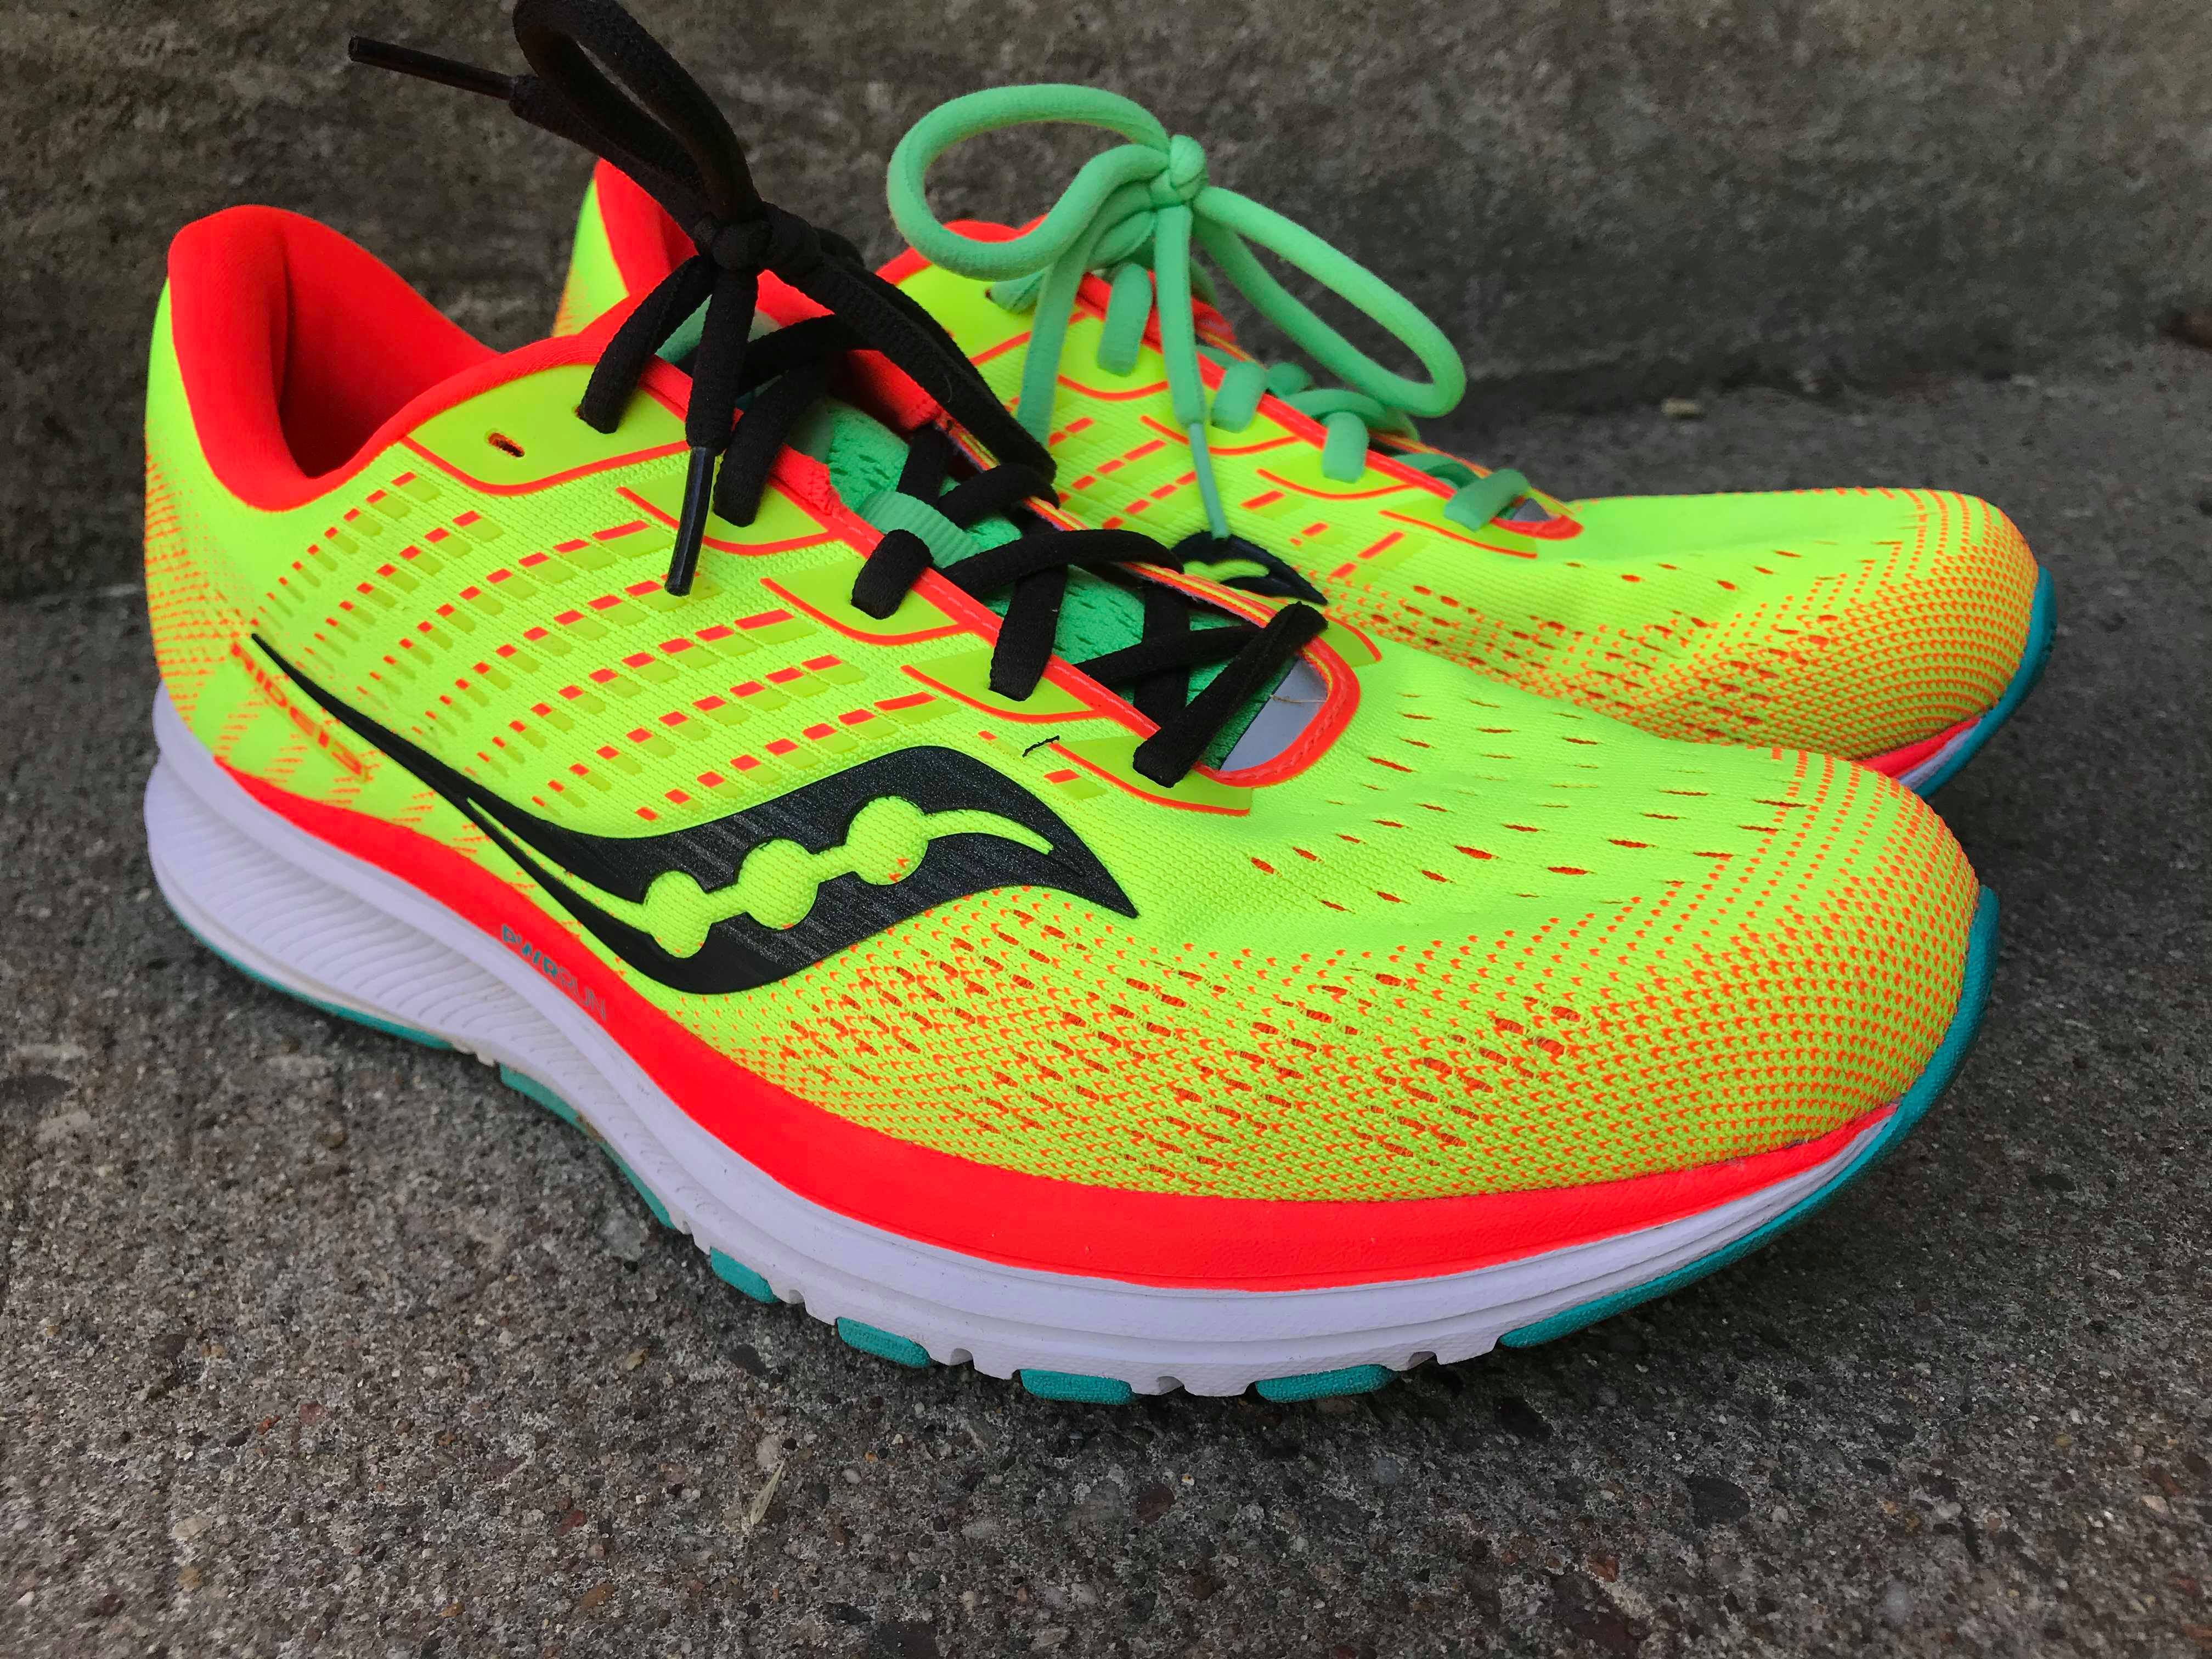 Saucony Ride 13 Multiple Tester Review - DOCTORS OF RUNNING